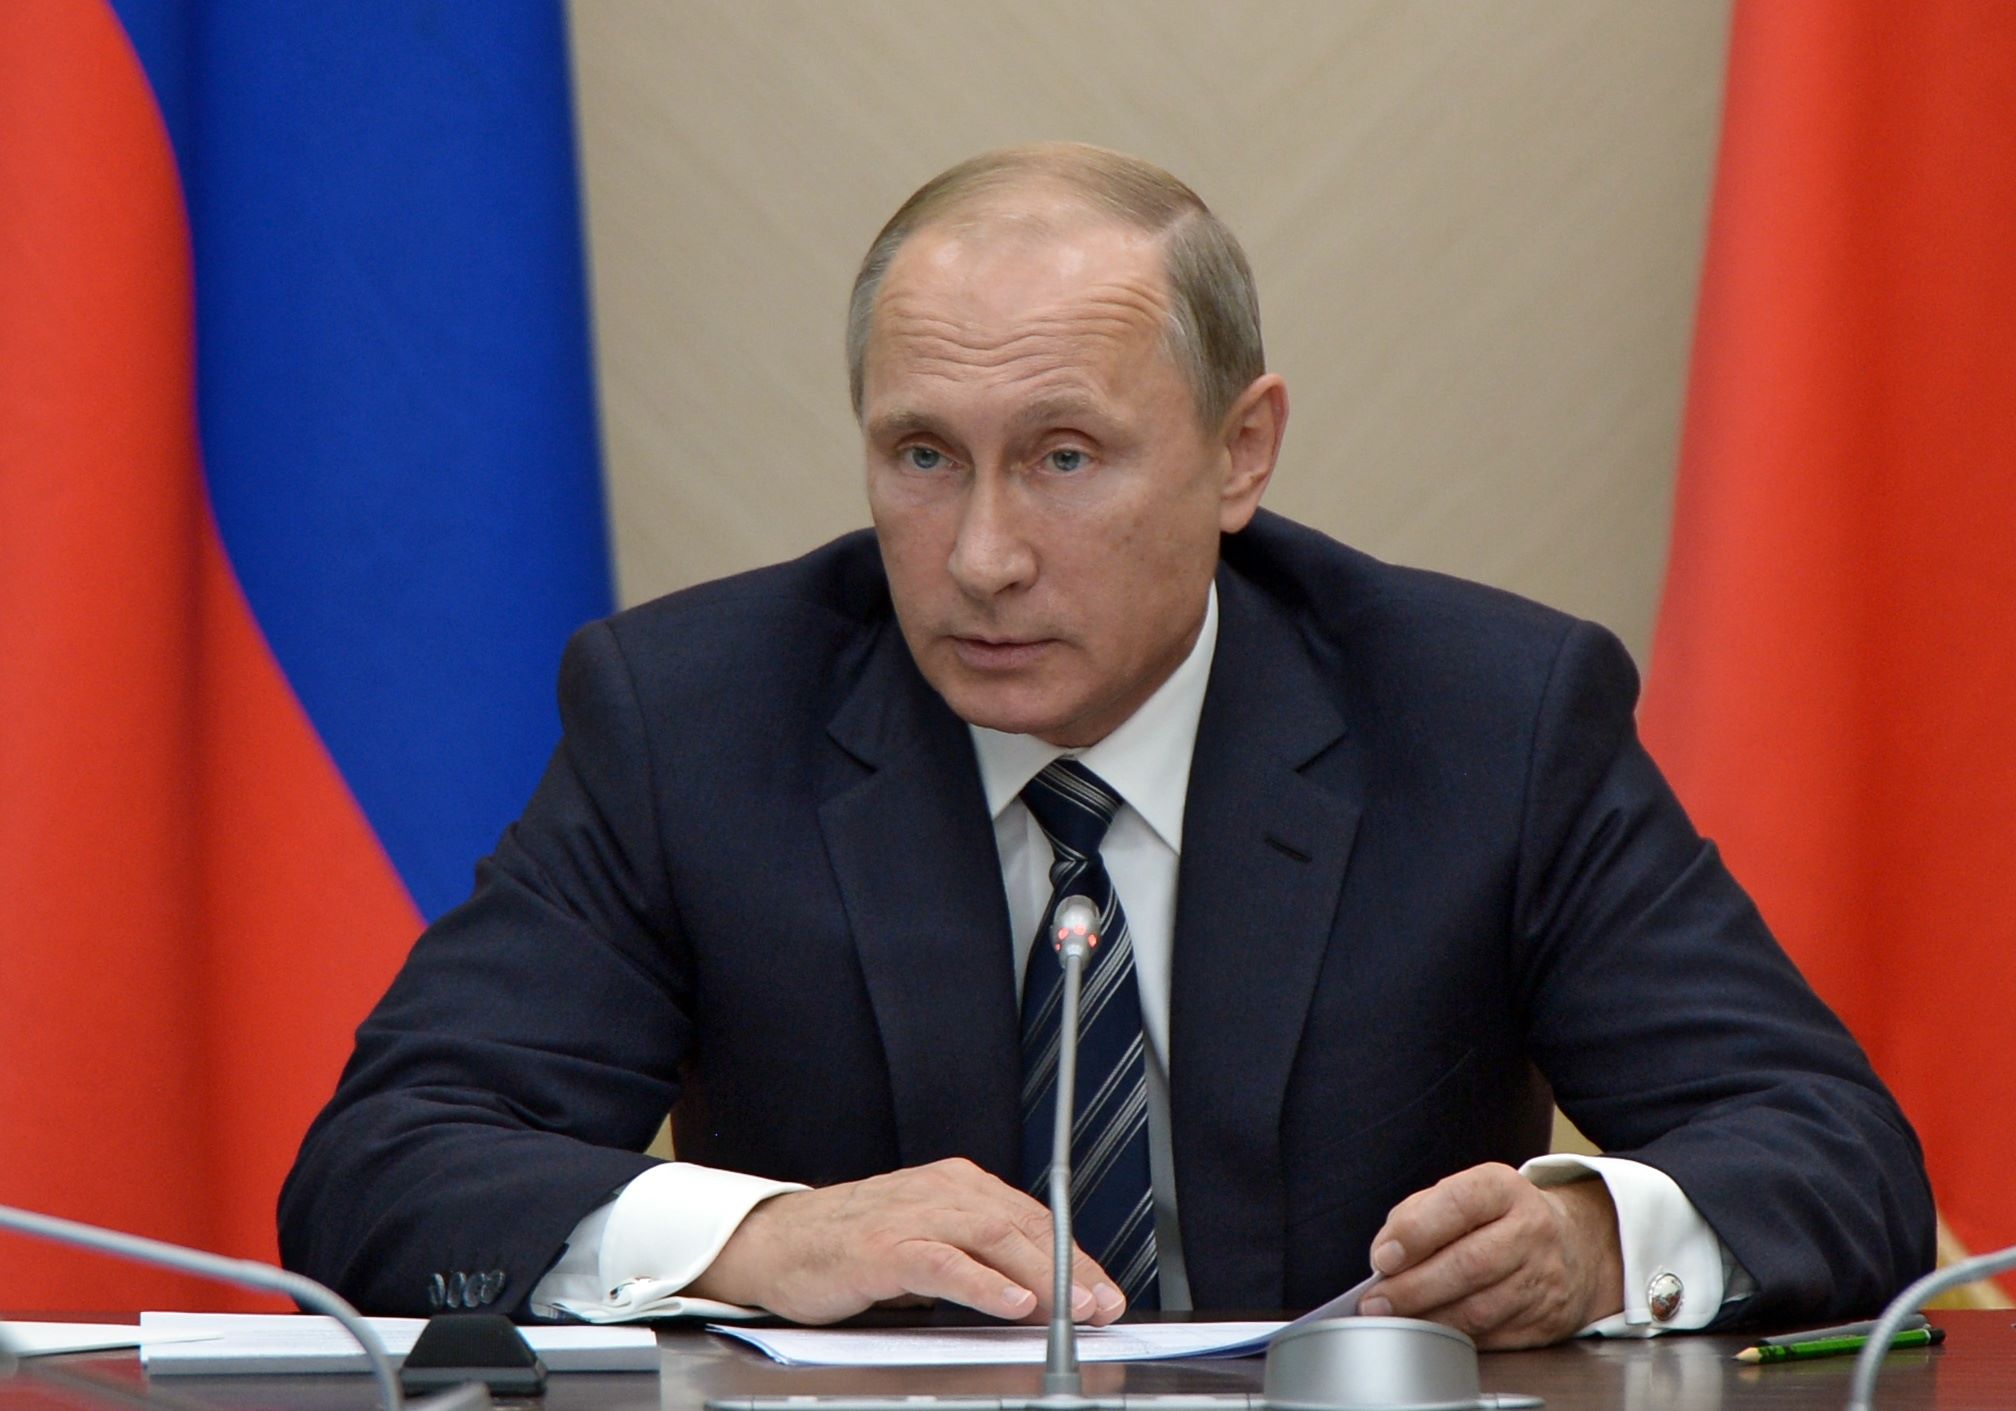 Russia's President Vladimir Putin chairs a meeting with members of the government at the Novo-Ogaryovo residence outside Moscow on September 30, 2015. President Vladimir Putin on September 30 said Syria's embattled leader Bashar al-Assad must be ready for compromise with the opposition as Russia launched its first air strikes in the war-torn country. AFP PHOTO / RIA NOVOSTI / ALEXEI NIKOLSKY